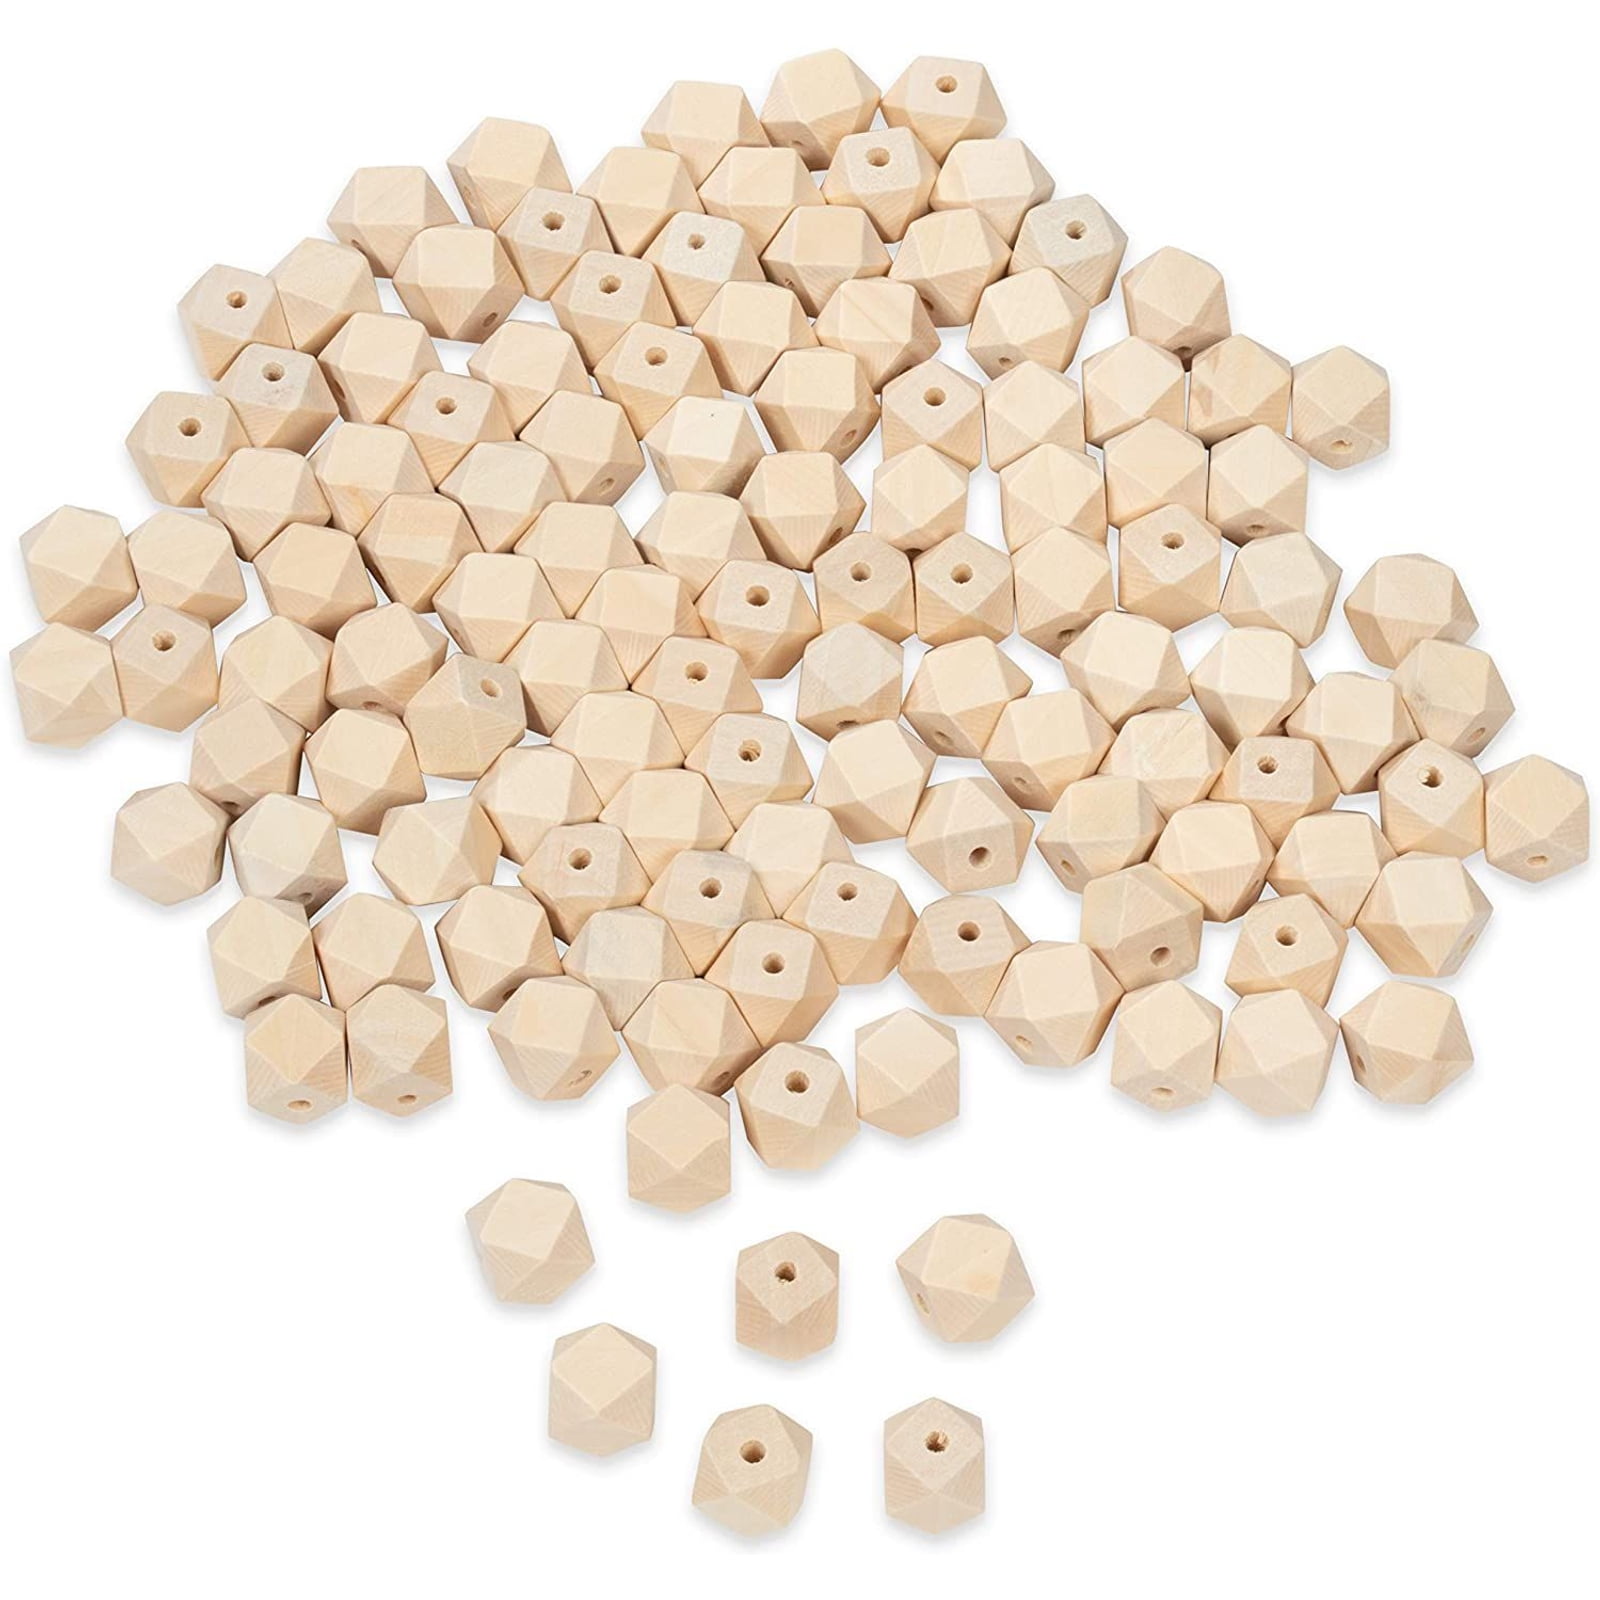 170pcs Natural Wooden Beads for Crafts Loose Solid Wooden Spacer Beads  Assorted Round Wood Ball for DIY Handmade Jewelry Making Bracelet Garland  Hair (16mm/20mm/25mm) 